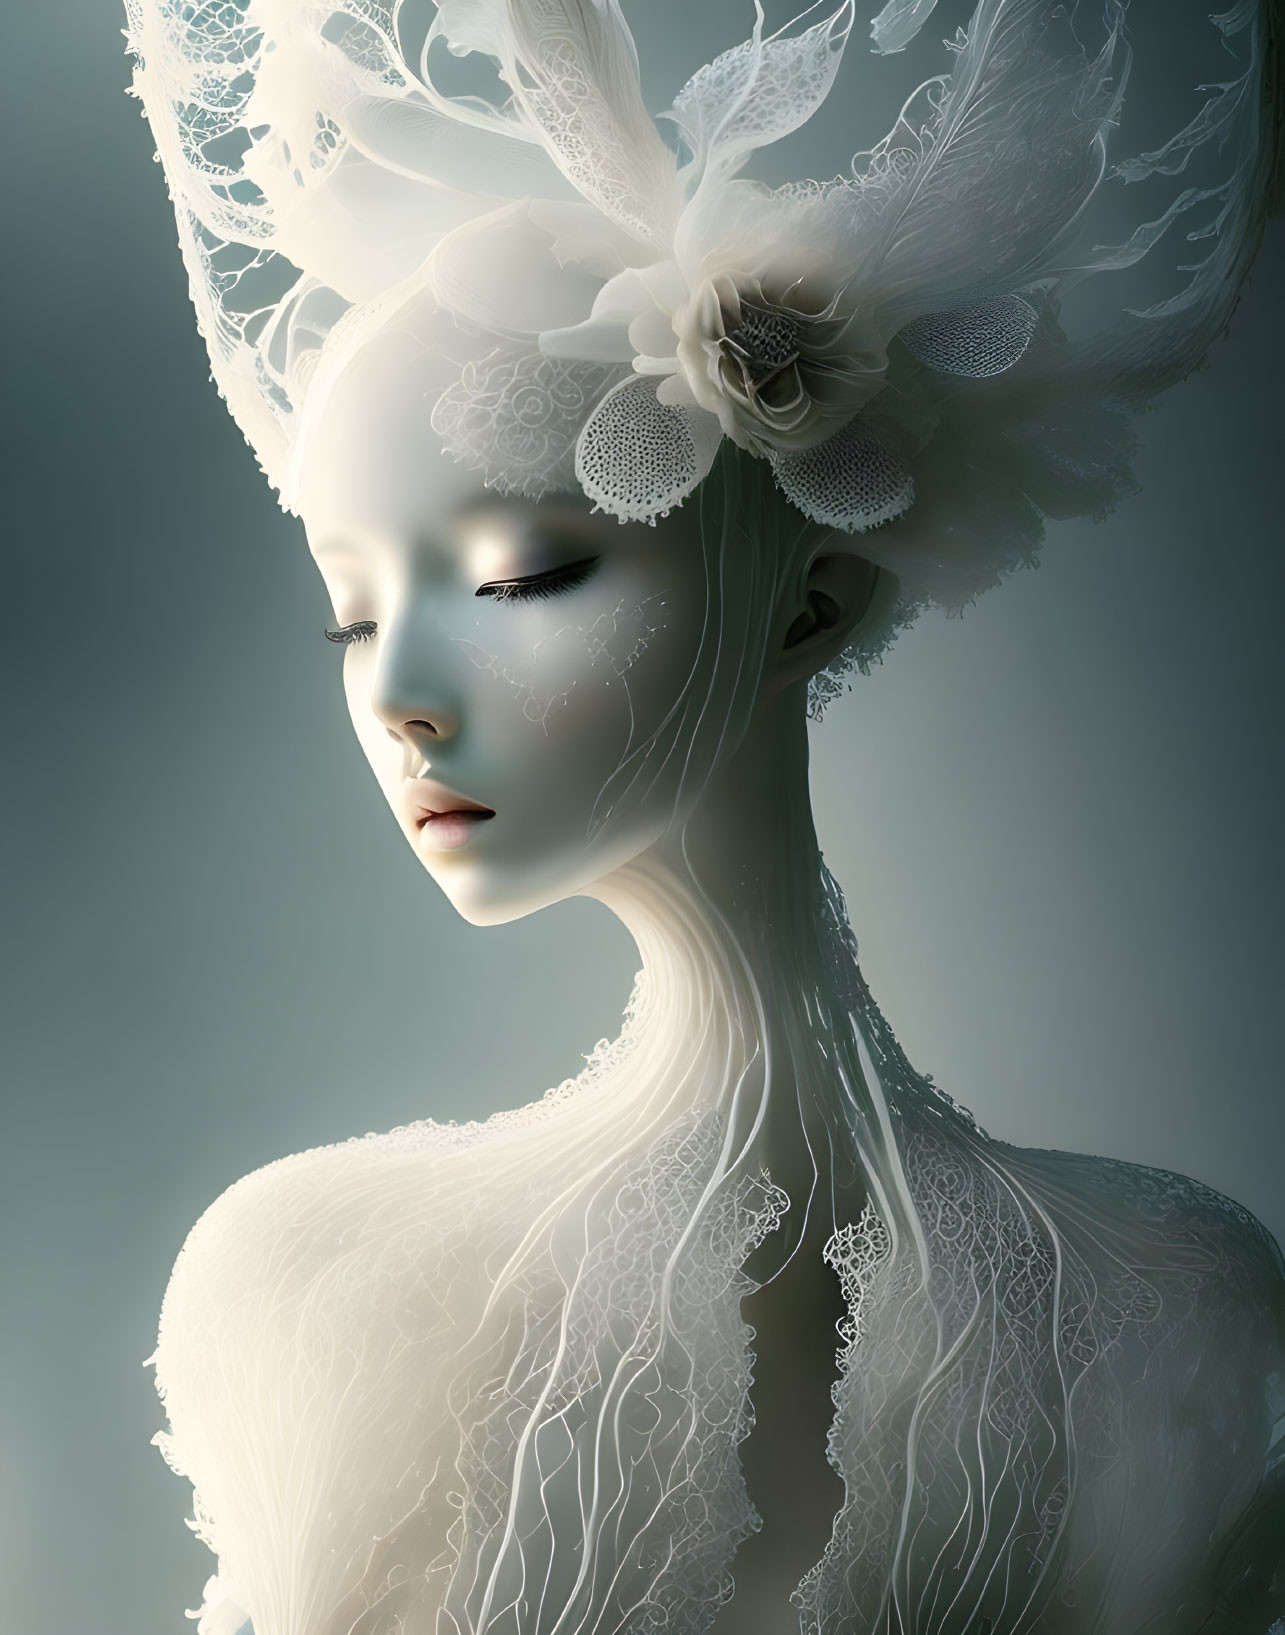 Ethereal woman with delicate lace features and intricate adornments